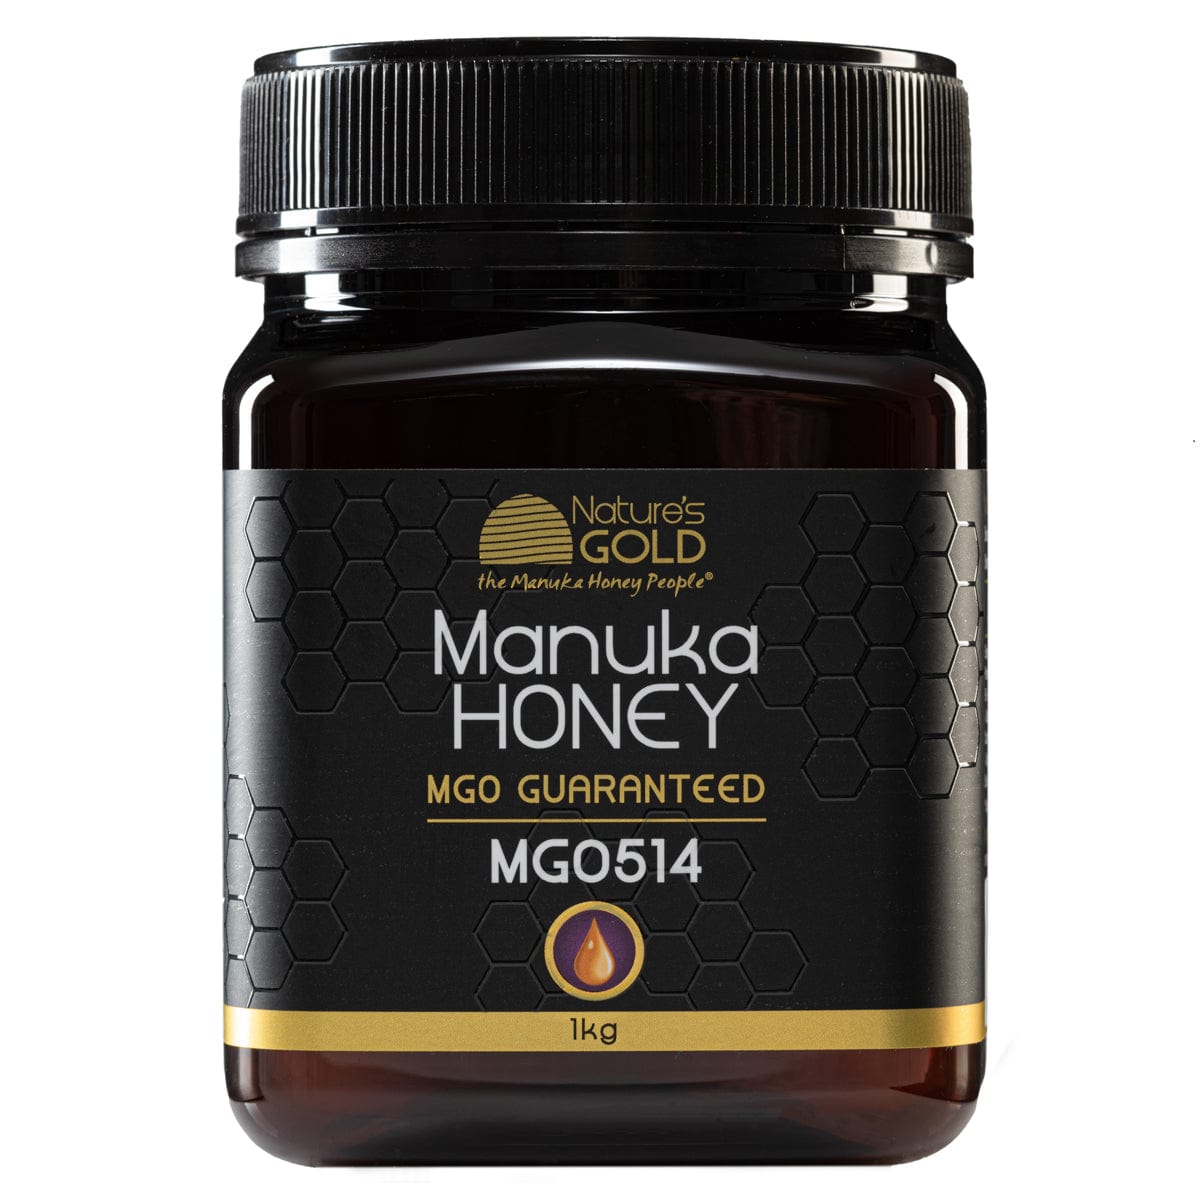 MGO 514 - 100% RAW AUSTRALIAN MANUKA HONEY - High strength to help fight infection taken orally or applied topically